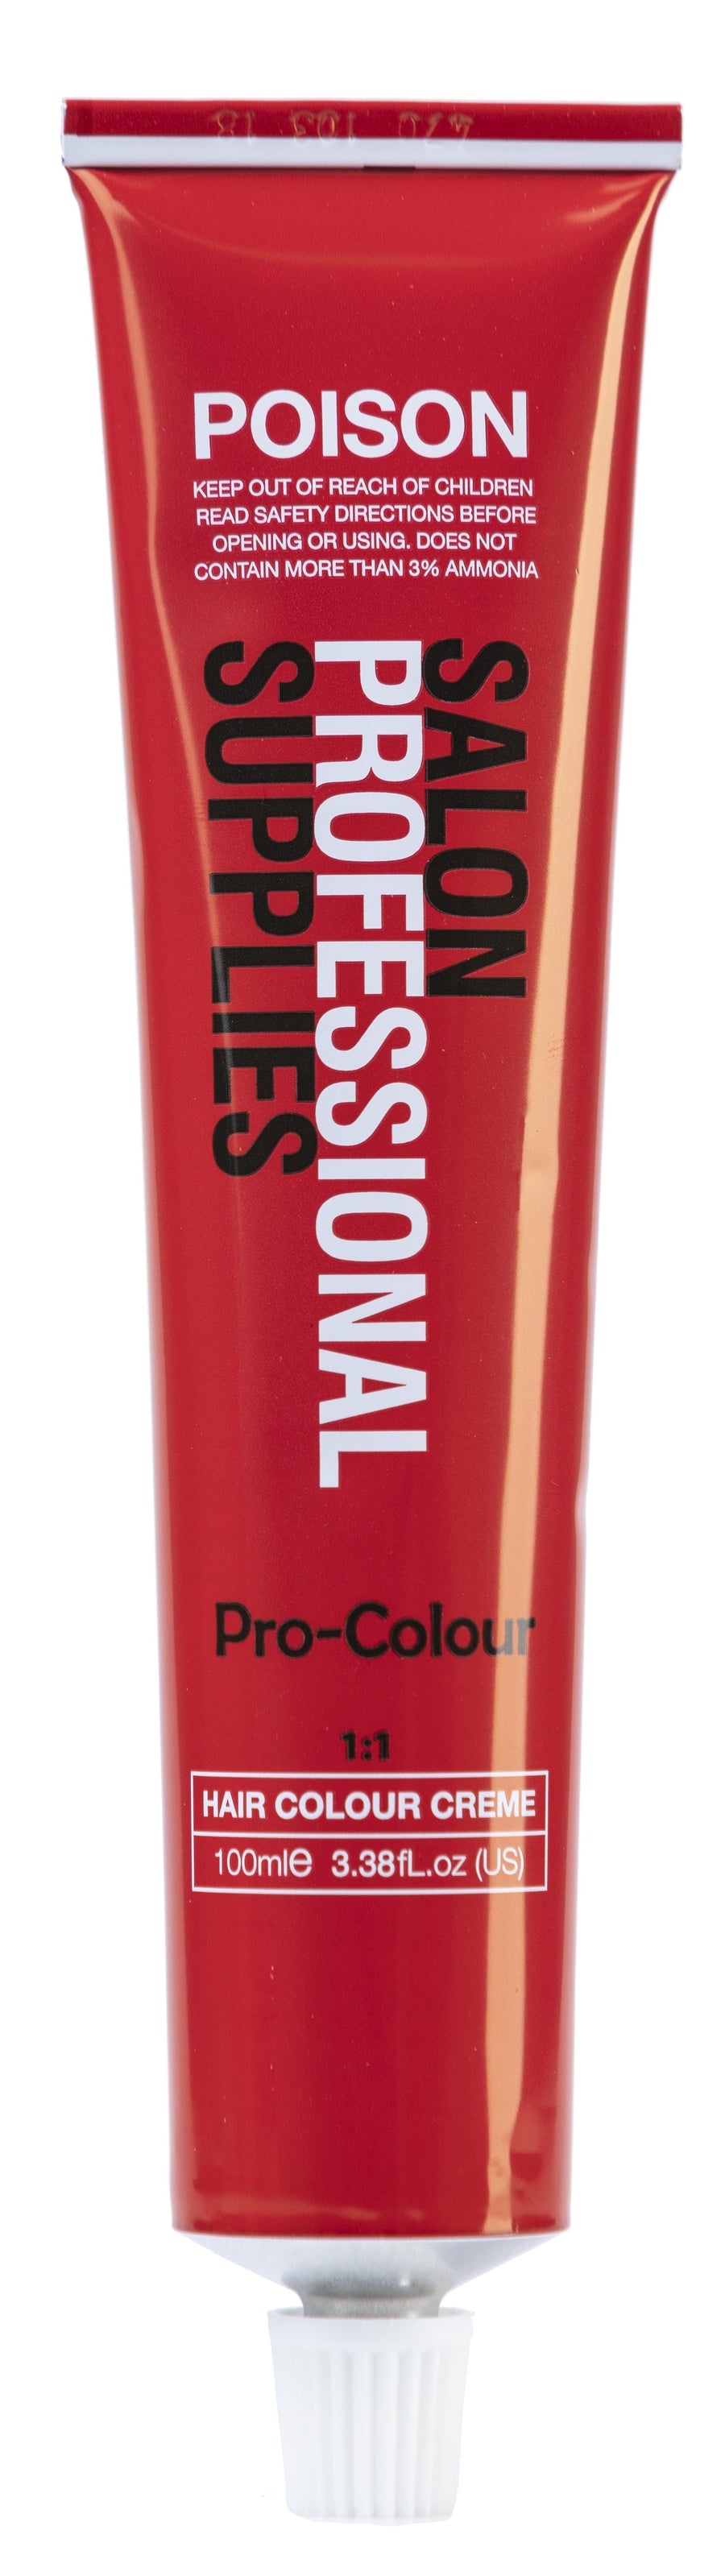 SPS Tint 7.65 Red Mahogany Blonde 100ml - Price Attack